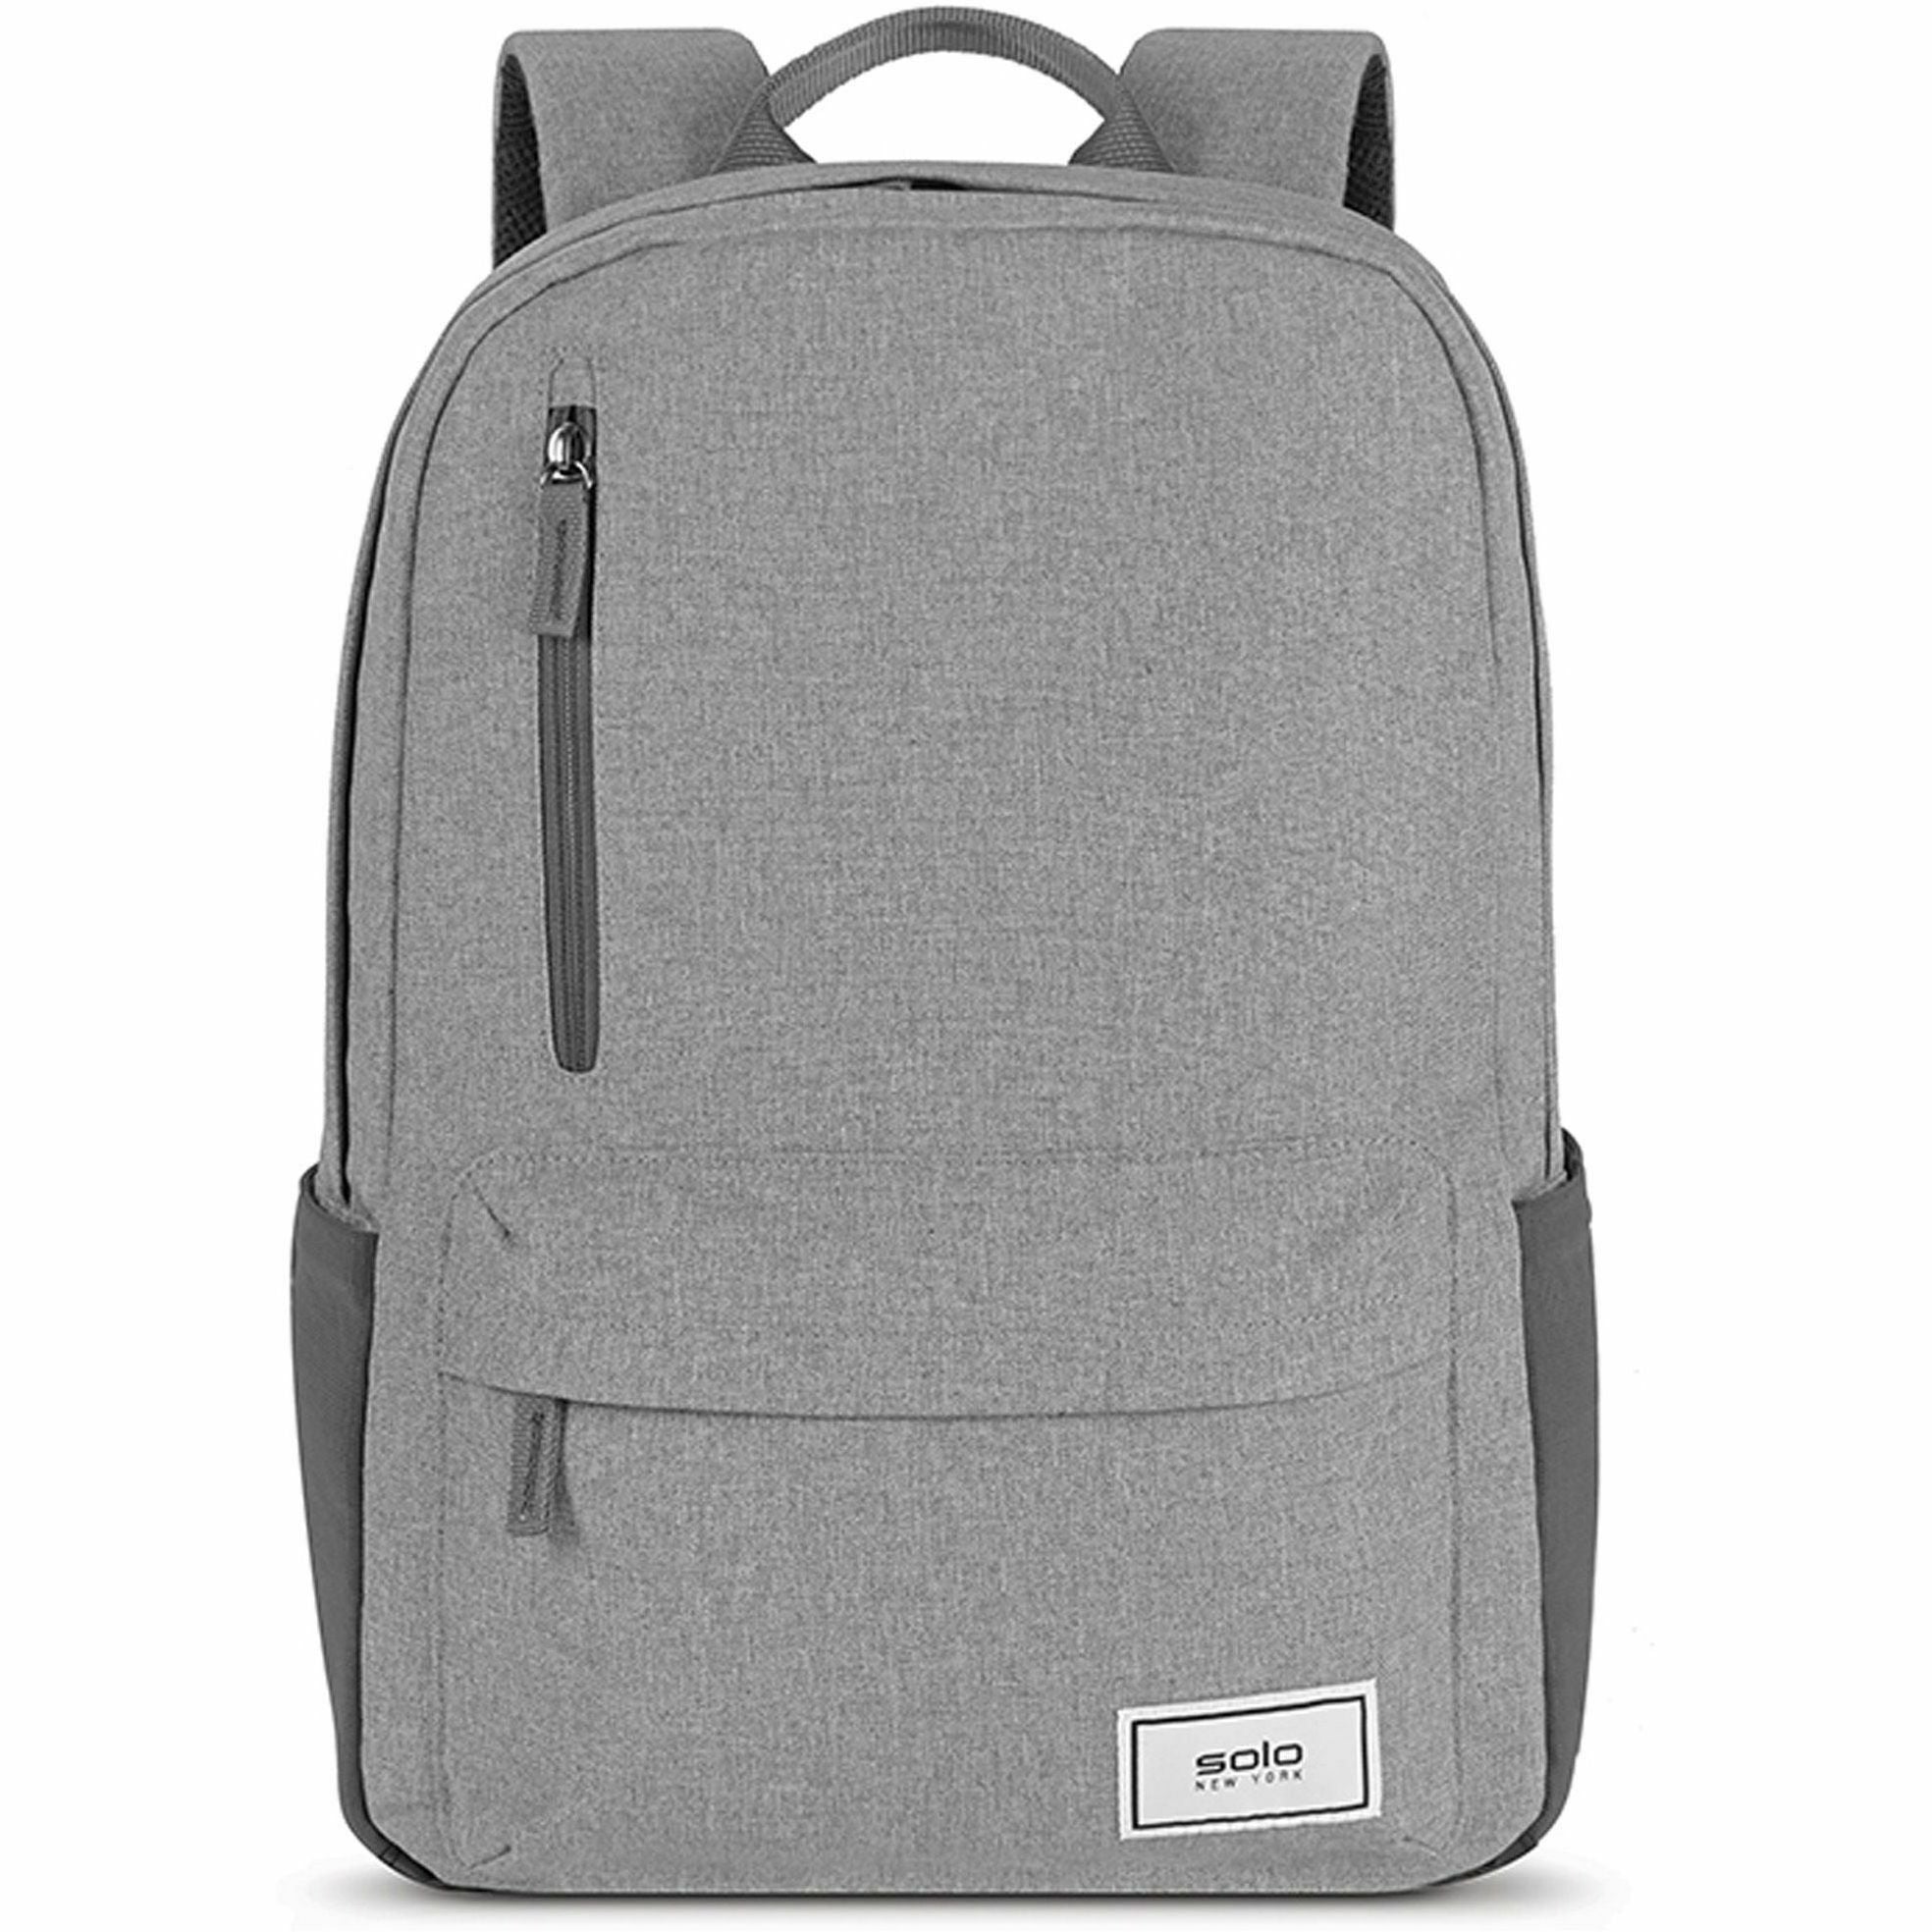 solo-recover-carrying-case-backpack-for-156-notebook-gray-bump-resistant-damage-resistant-shoulder-strap-luggage-strap-handle-148-height-x-113-width-x-7-depth-1-each_uslubn76110 - 2